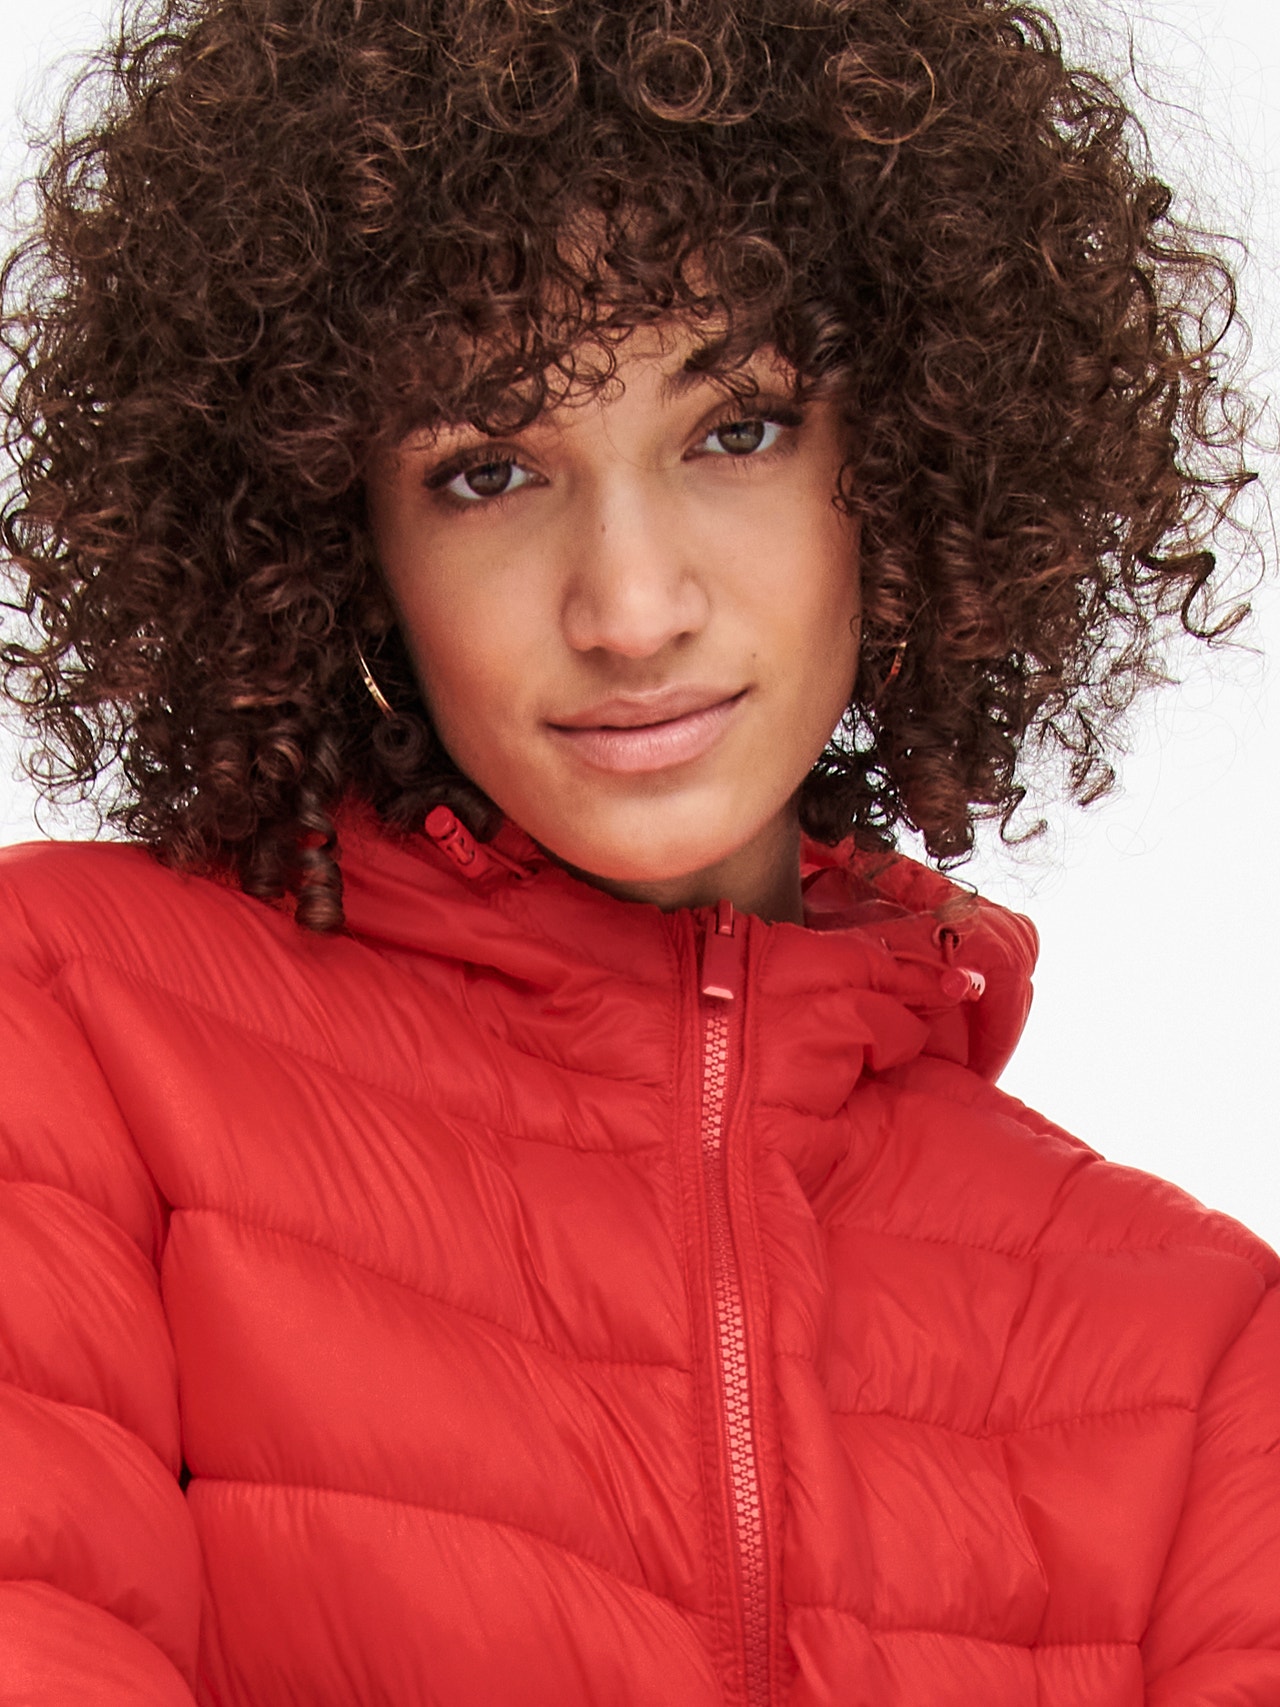 ONLY Manteaux Capuche -Poppy Red - 15258420